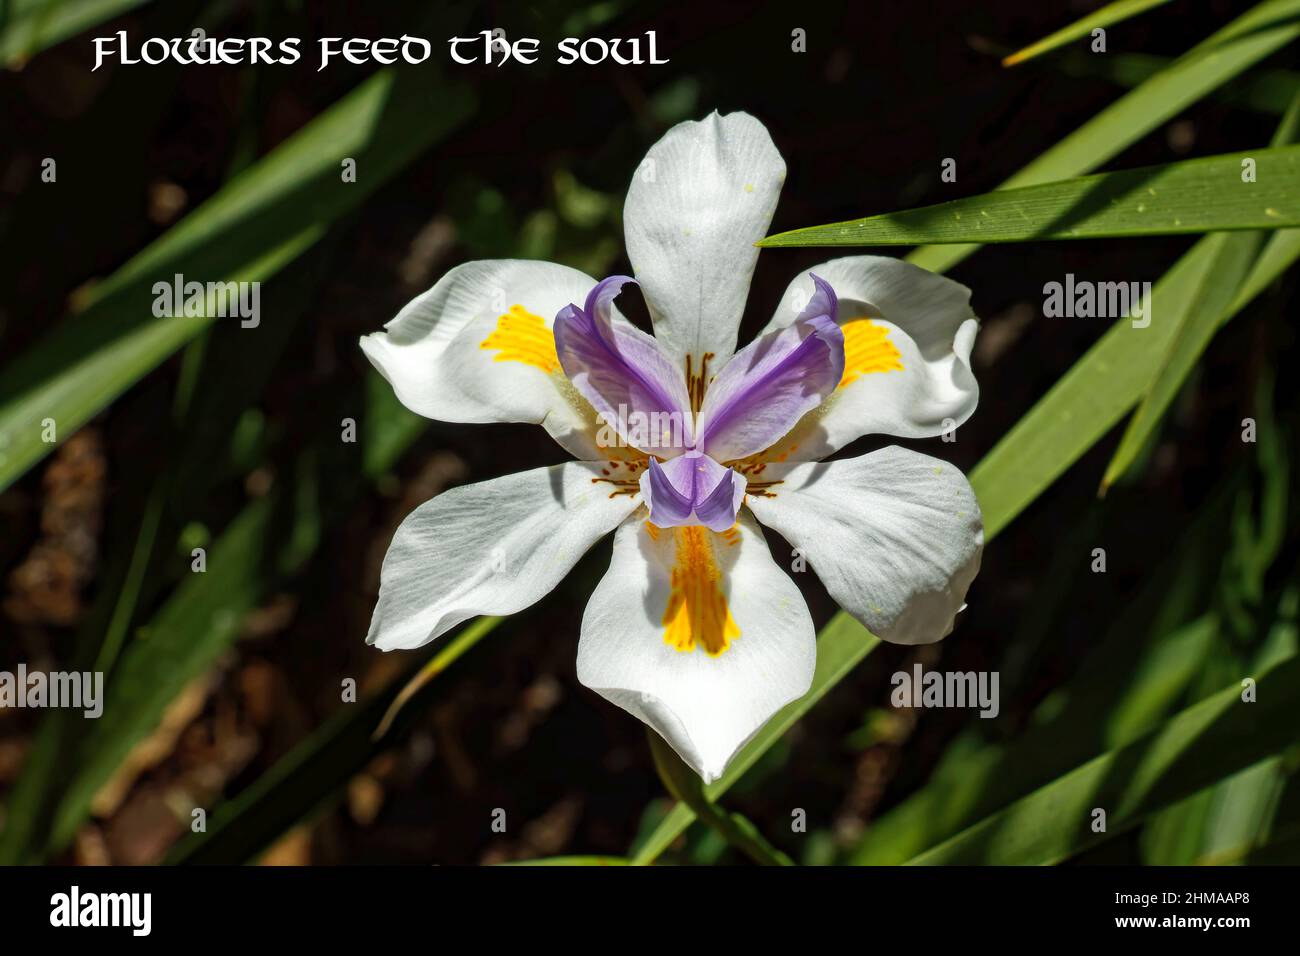 cultivated flower, text, words, Flowers feed the soul, close-up, 6 white petals, gold, purple center petals, nature, Florida, Bok Tower Gardens, Flori Stock Photo